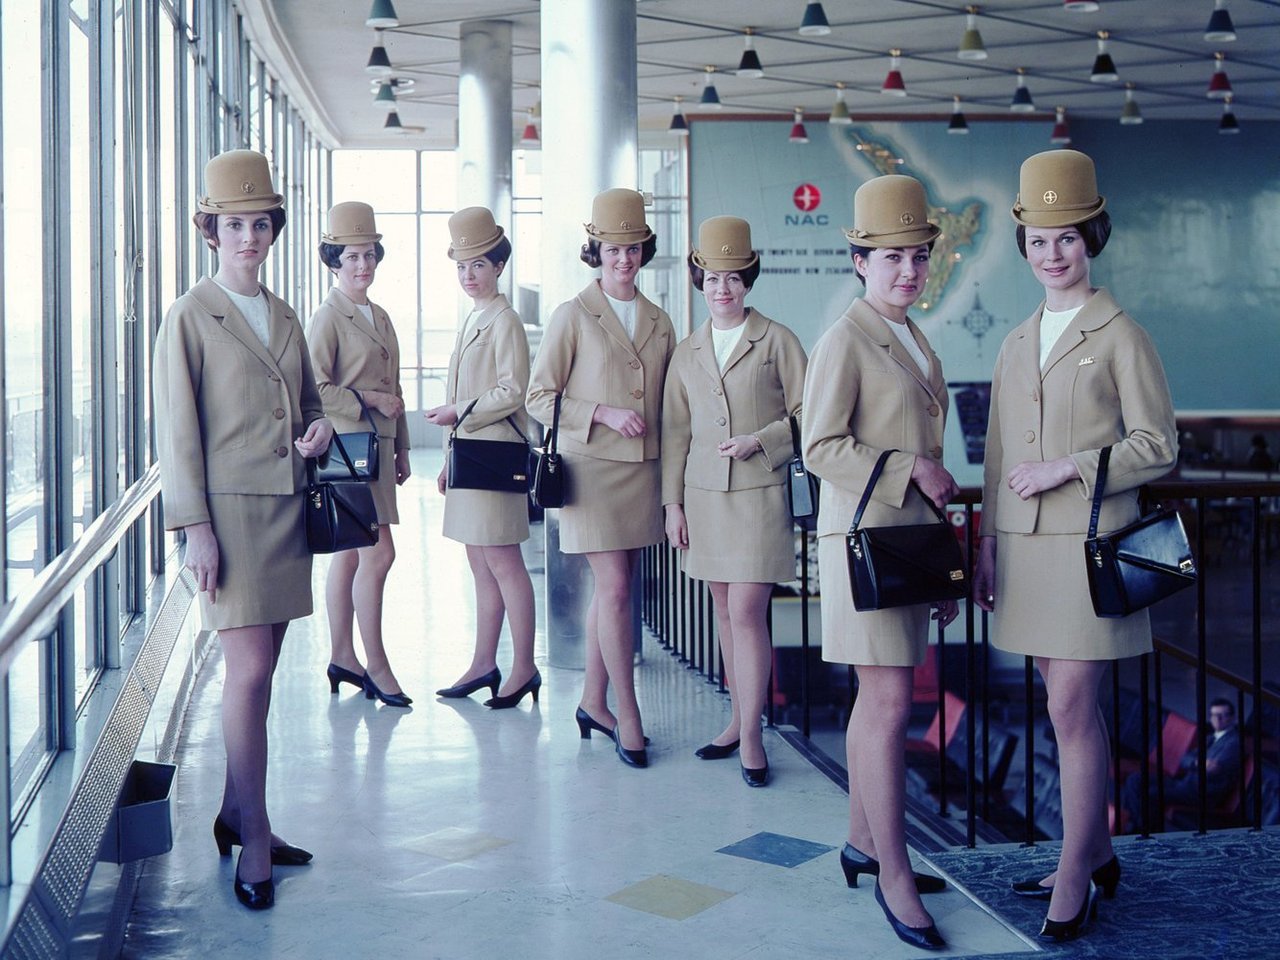 https://www.yves.brette.biz/public/humour/South_African_airline_National_Airways_Corporation_hostesses_between_1959_and_1975.jpg